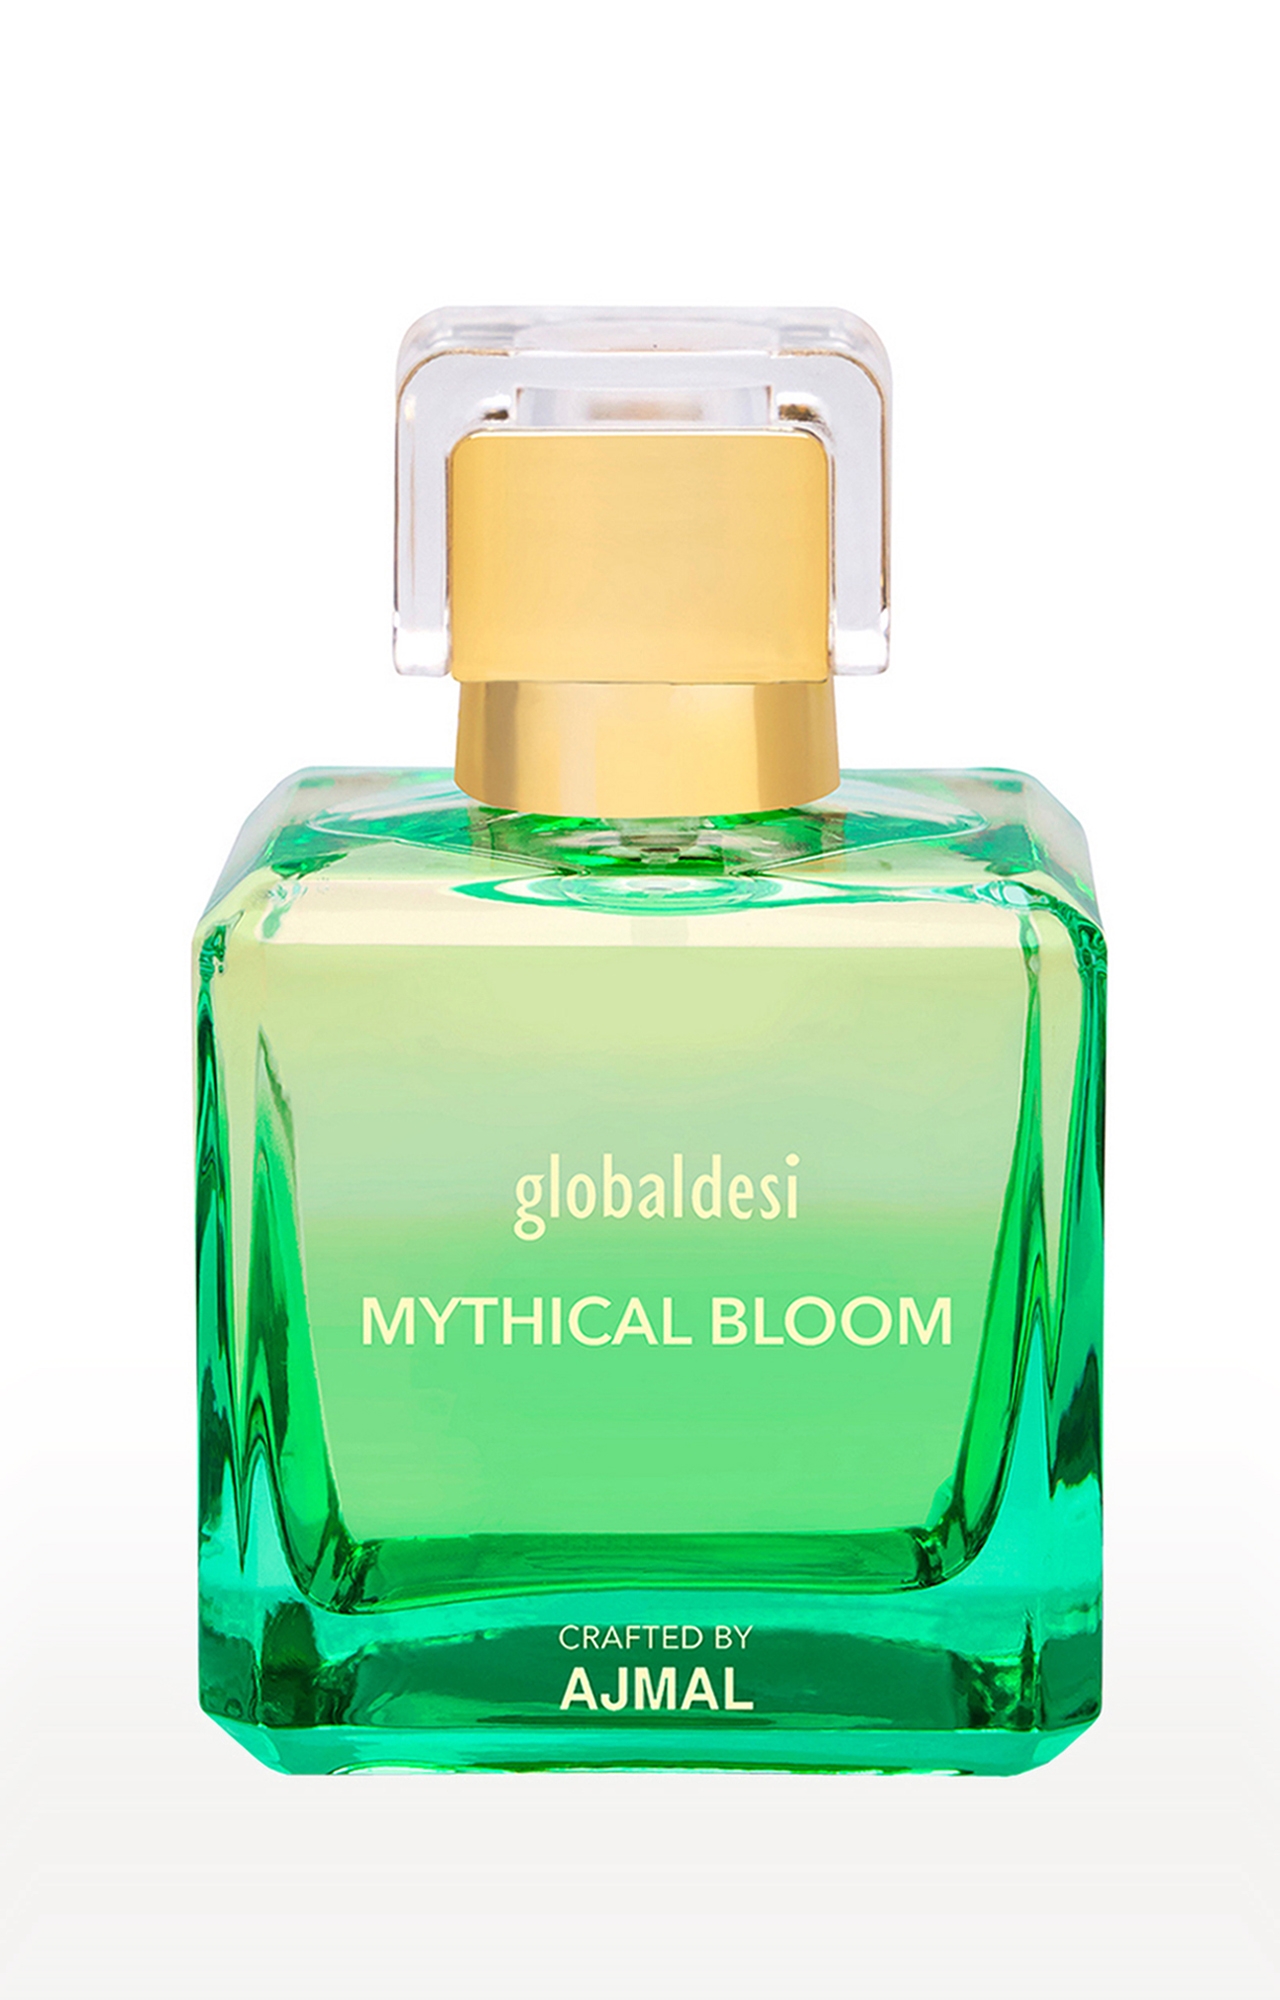 Global Mythical Bloom Trance Eau De Parfum 50ML Long Lasting Scent Spray Gift For Women Crafted By Ajmal